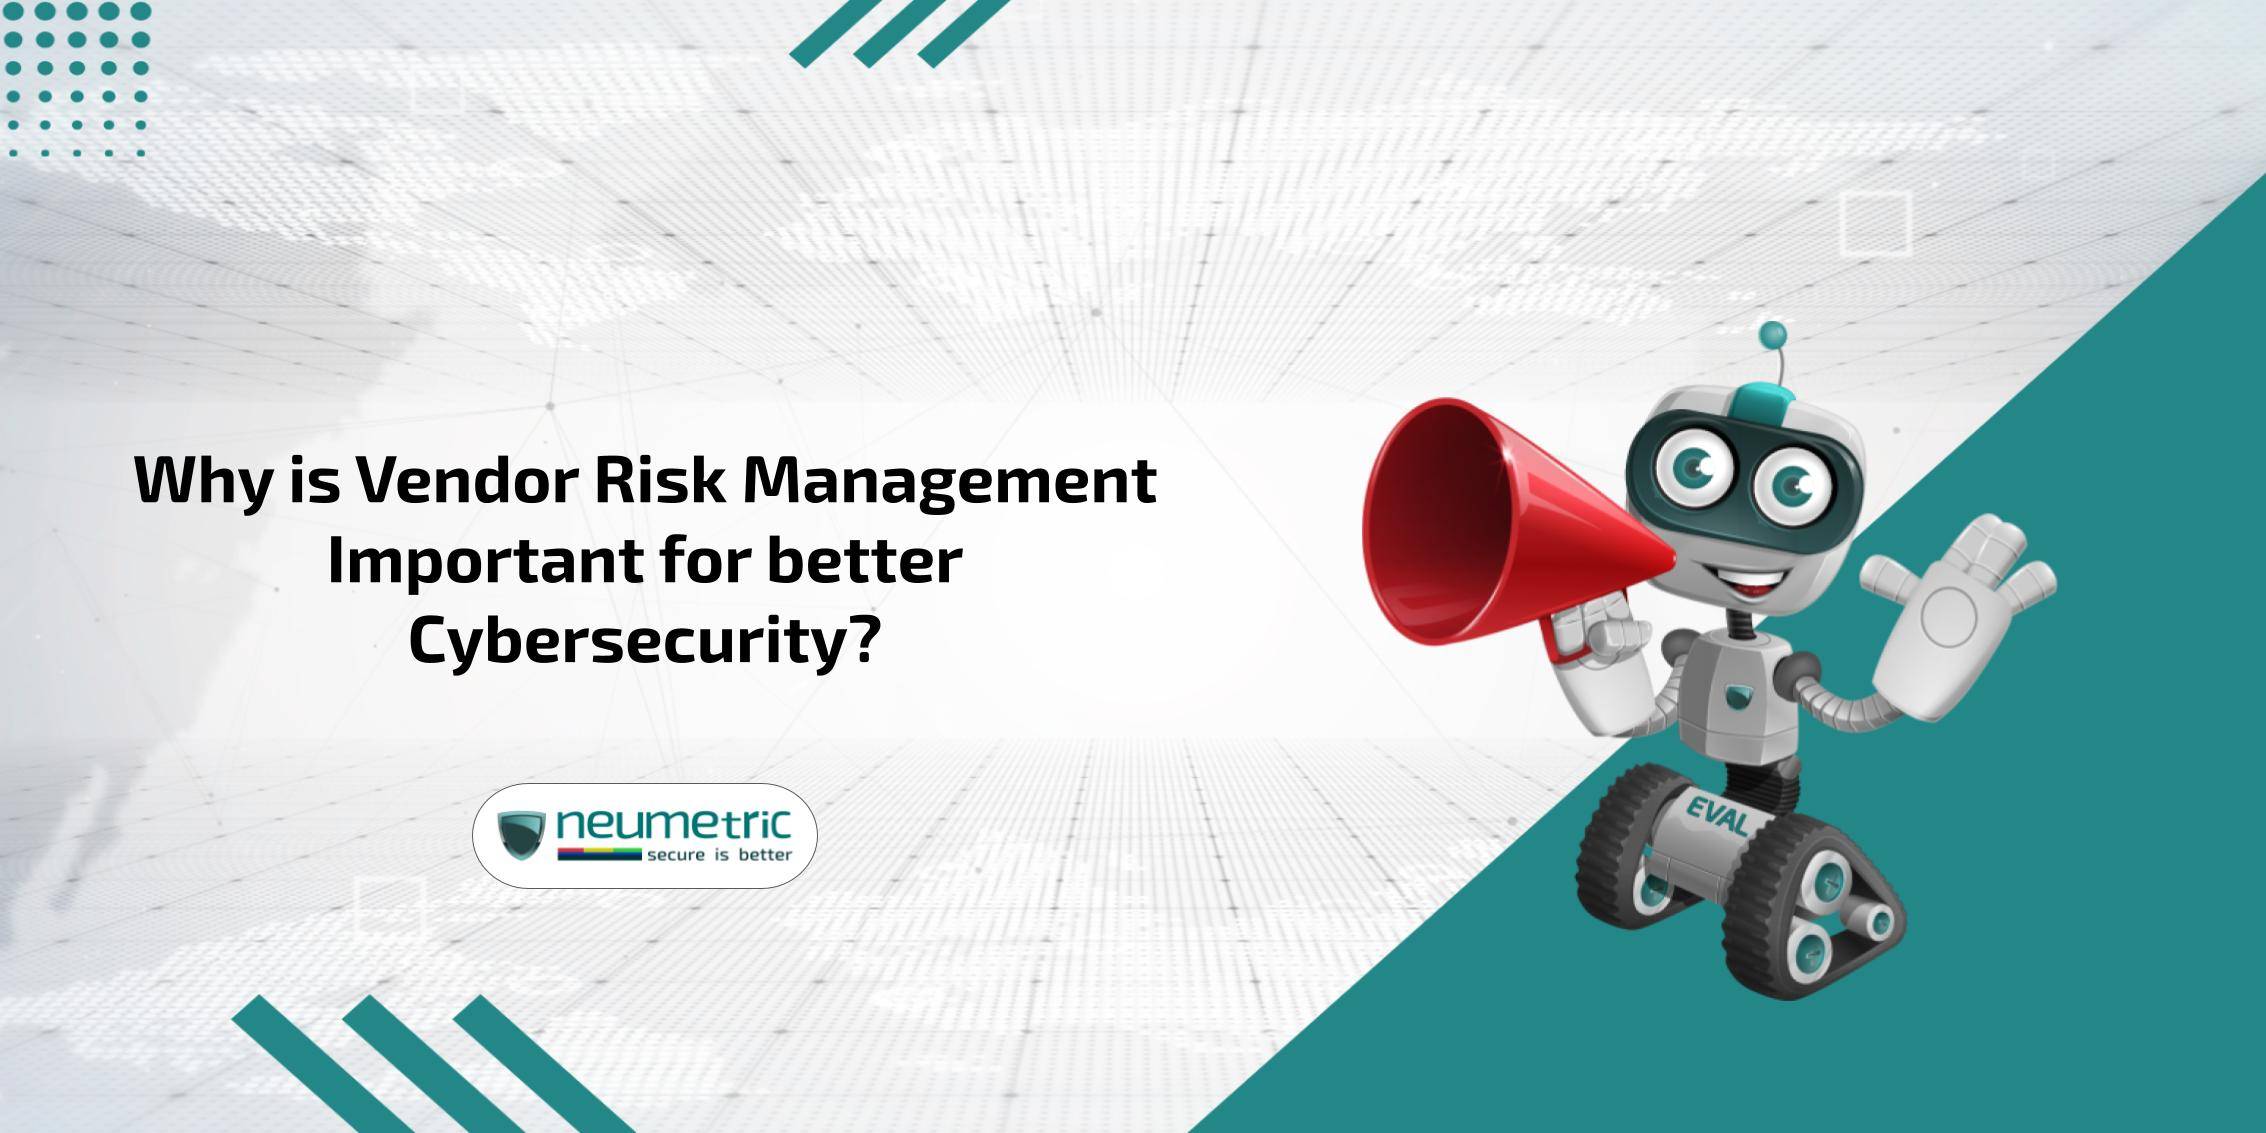 Why is Vendor Risk Management Important for better Cybersecurity?